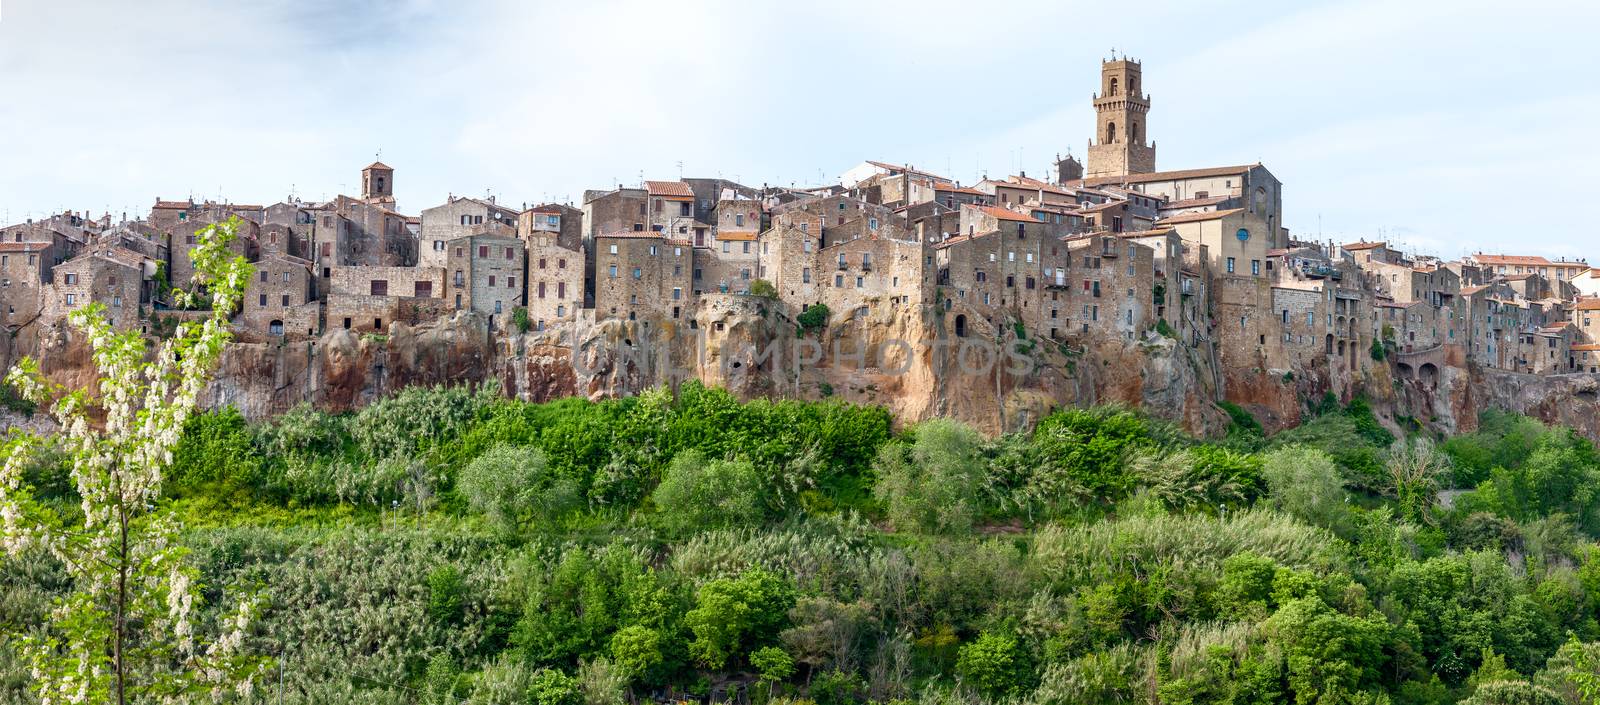 Panorama of the Pitigliano - city on clif in Italy